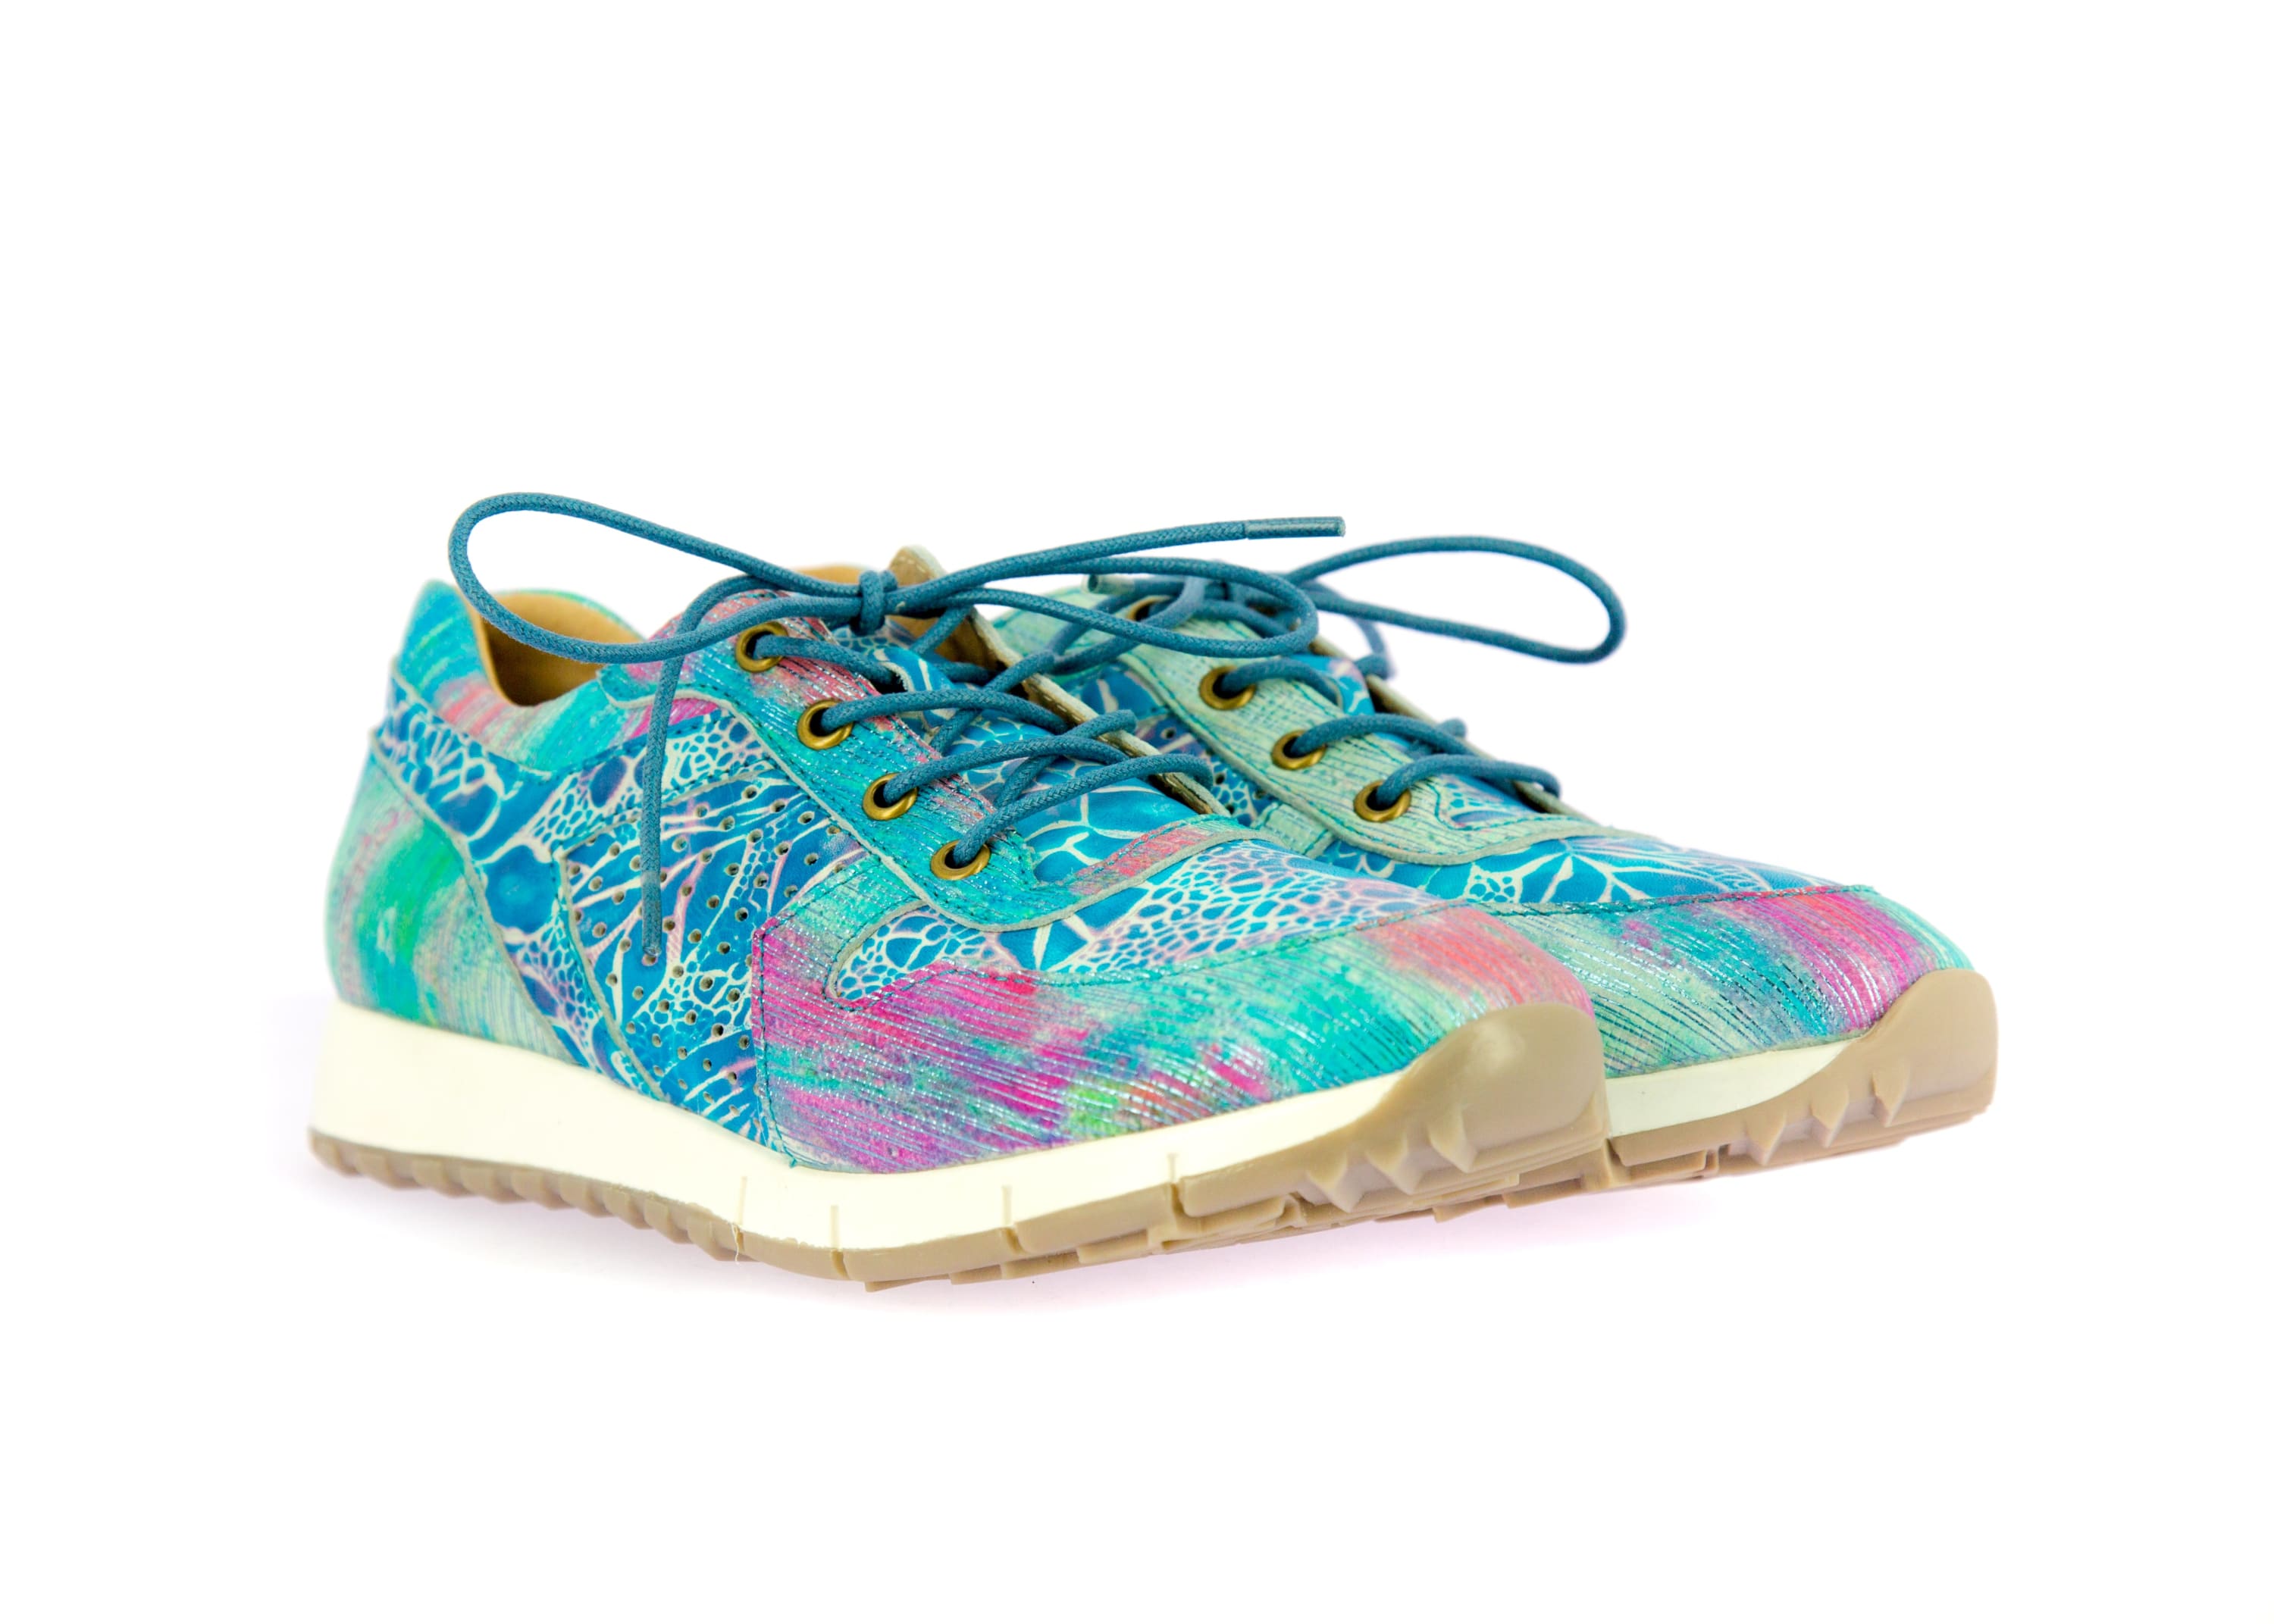 Chaussures DEPART 05 - 37 / Turquoise - Sport